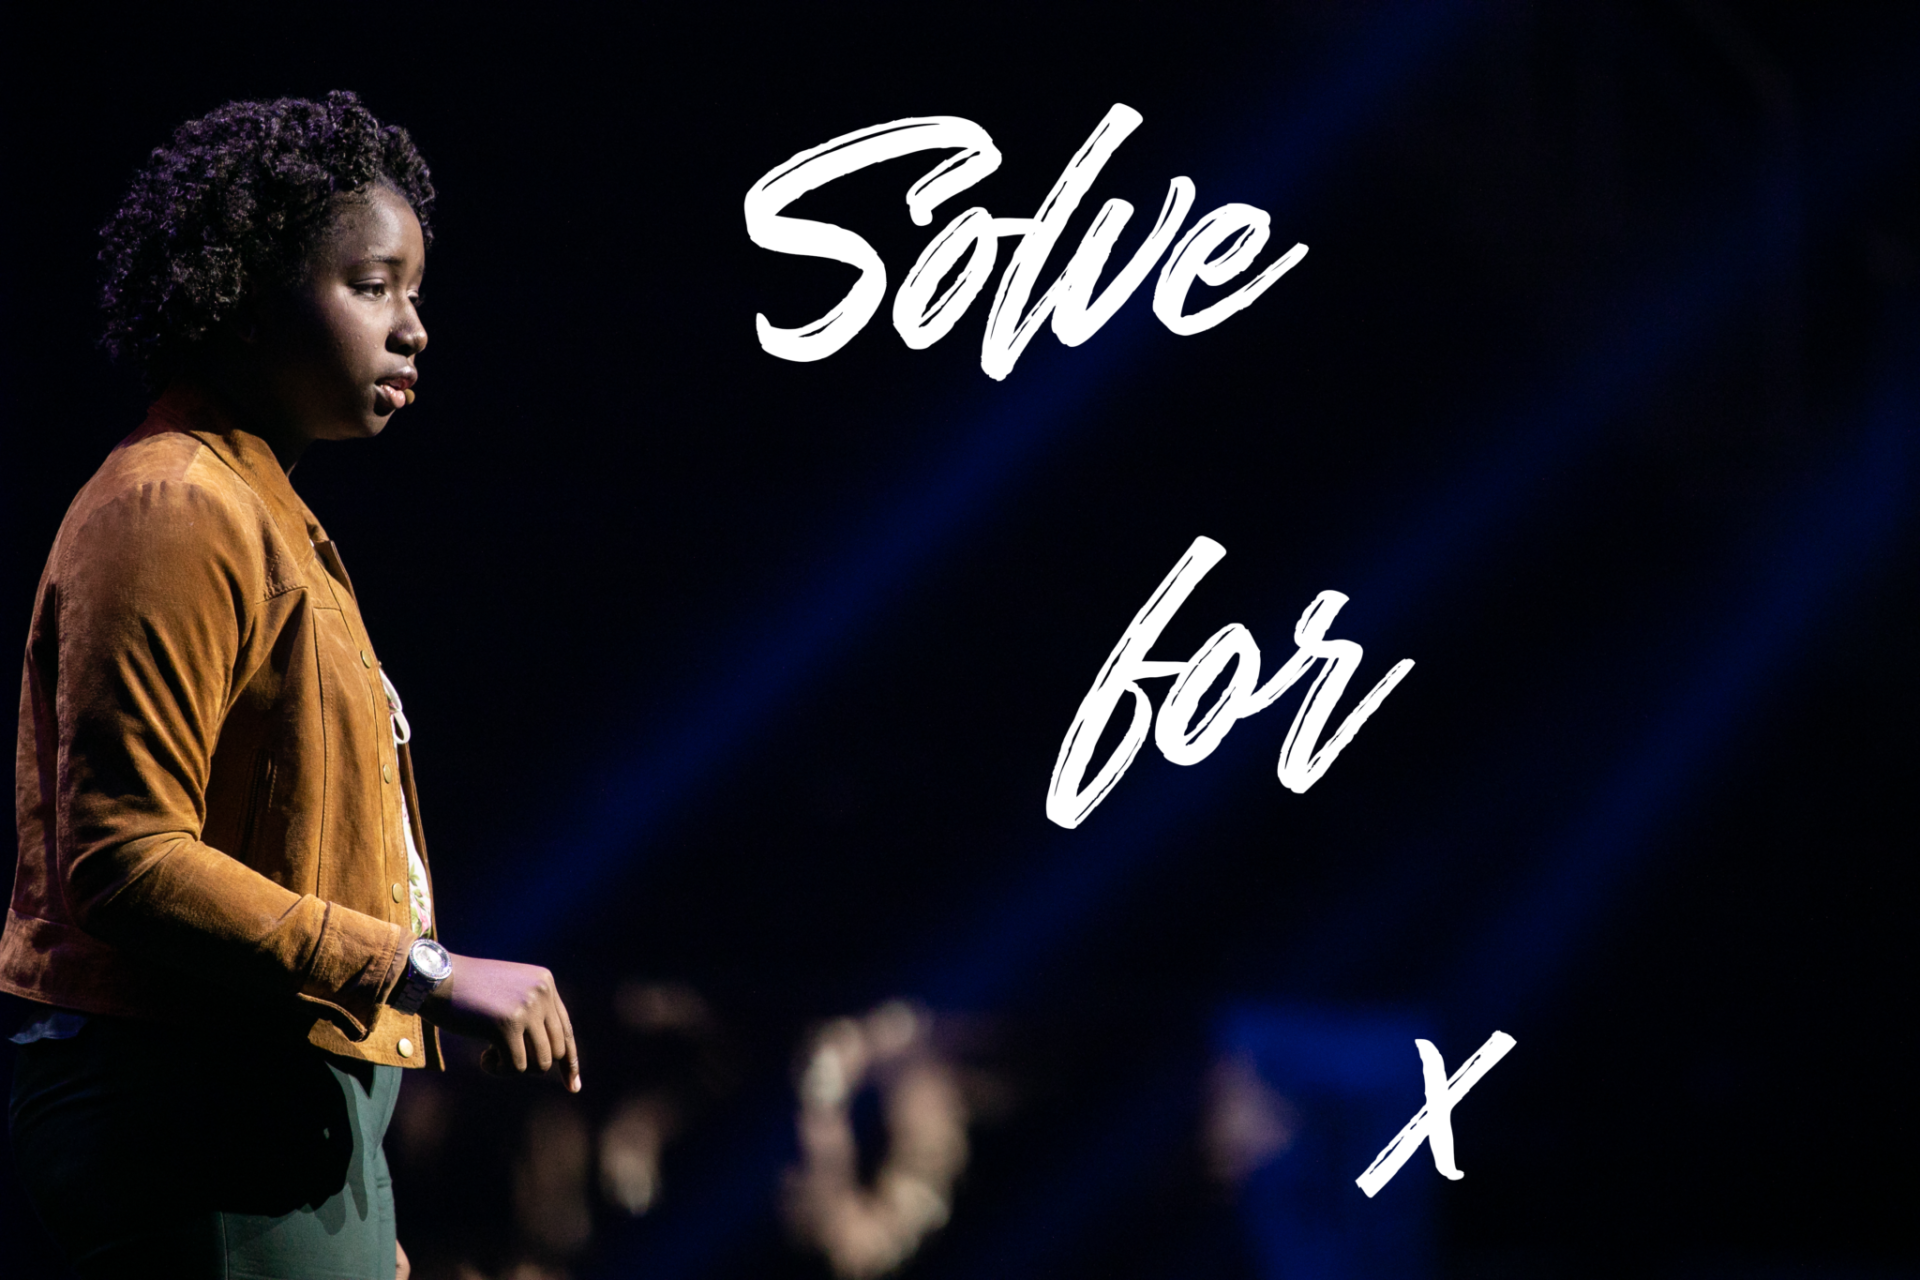 "solve for x" — Empowering Poem Performed at GHC 18 Keynote